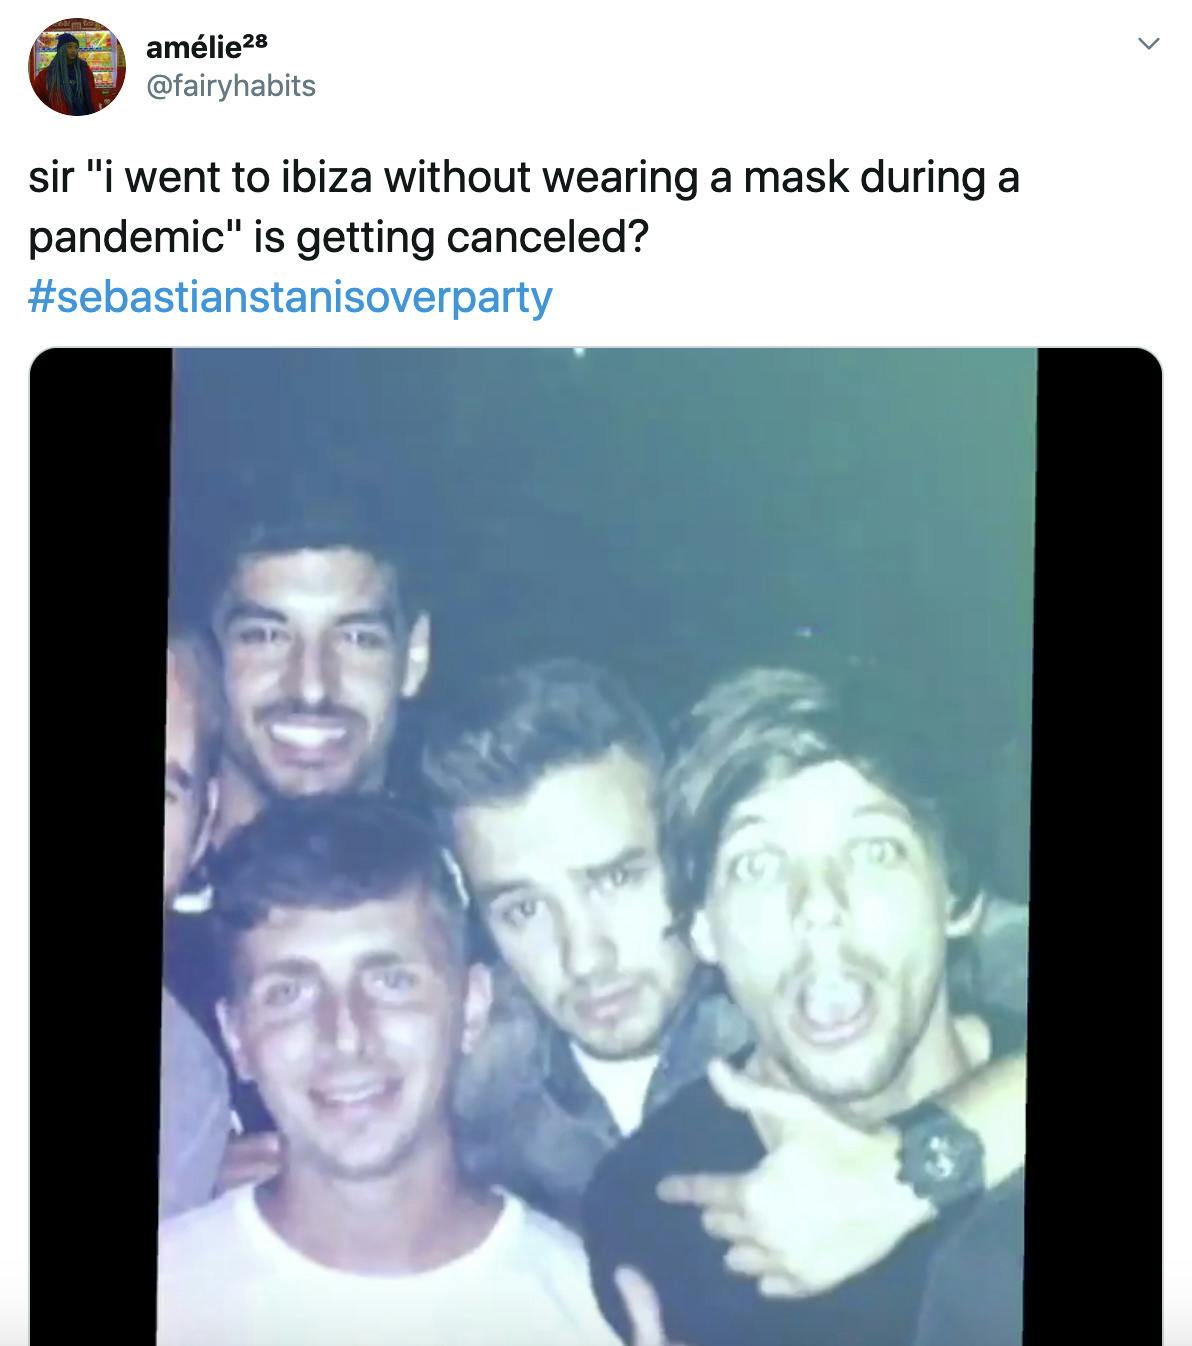 "sir "i went to ibiza without wearing a mask during a pandemic" is getting canceled? #sebastianstanisoverparty" gif of clubbing